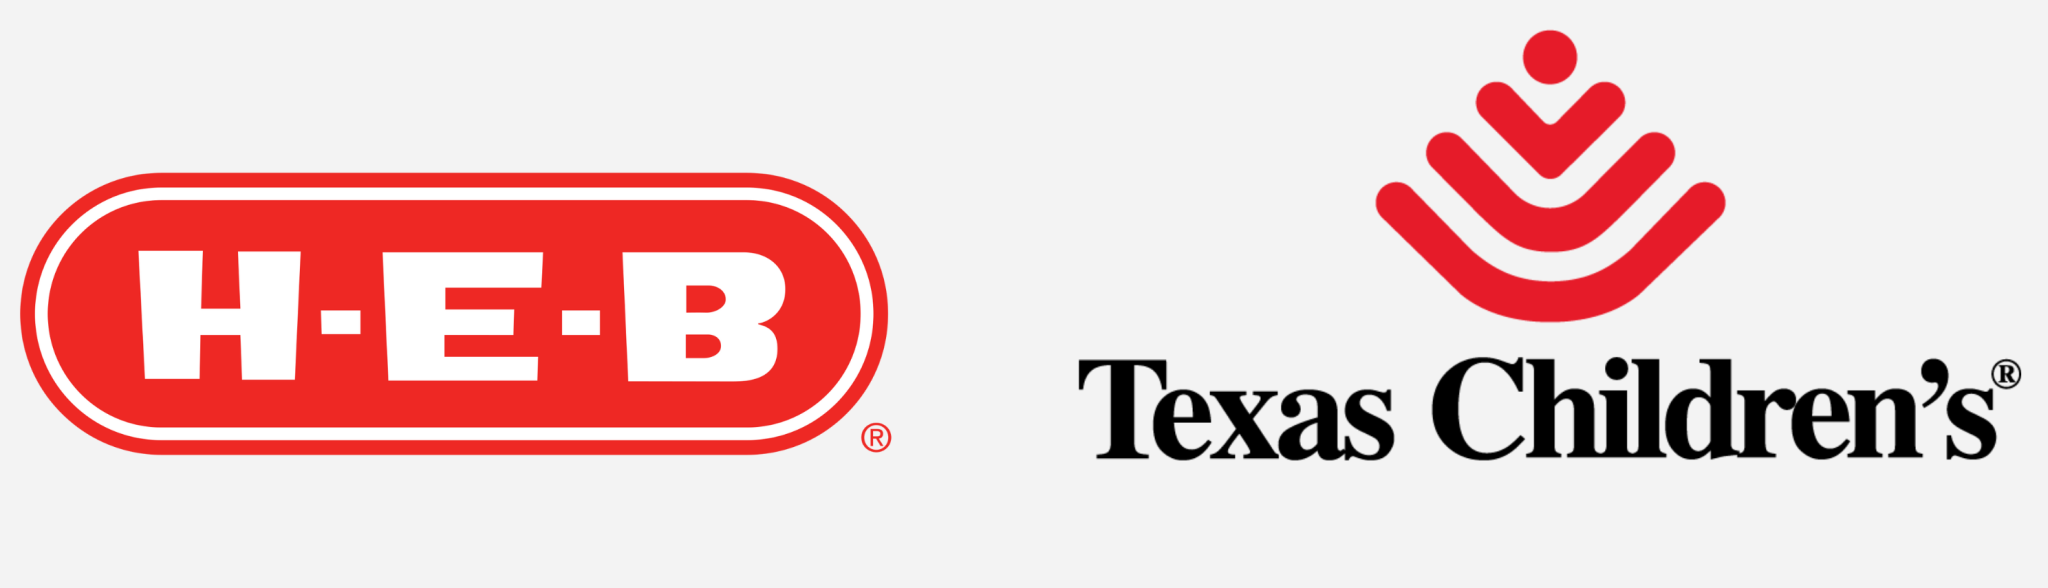 A logo for H-E-B and Texas Children's